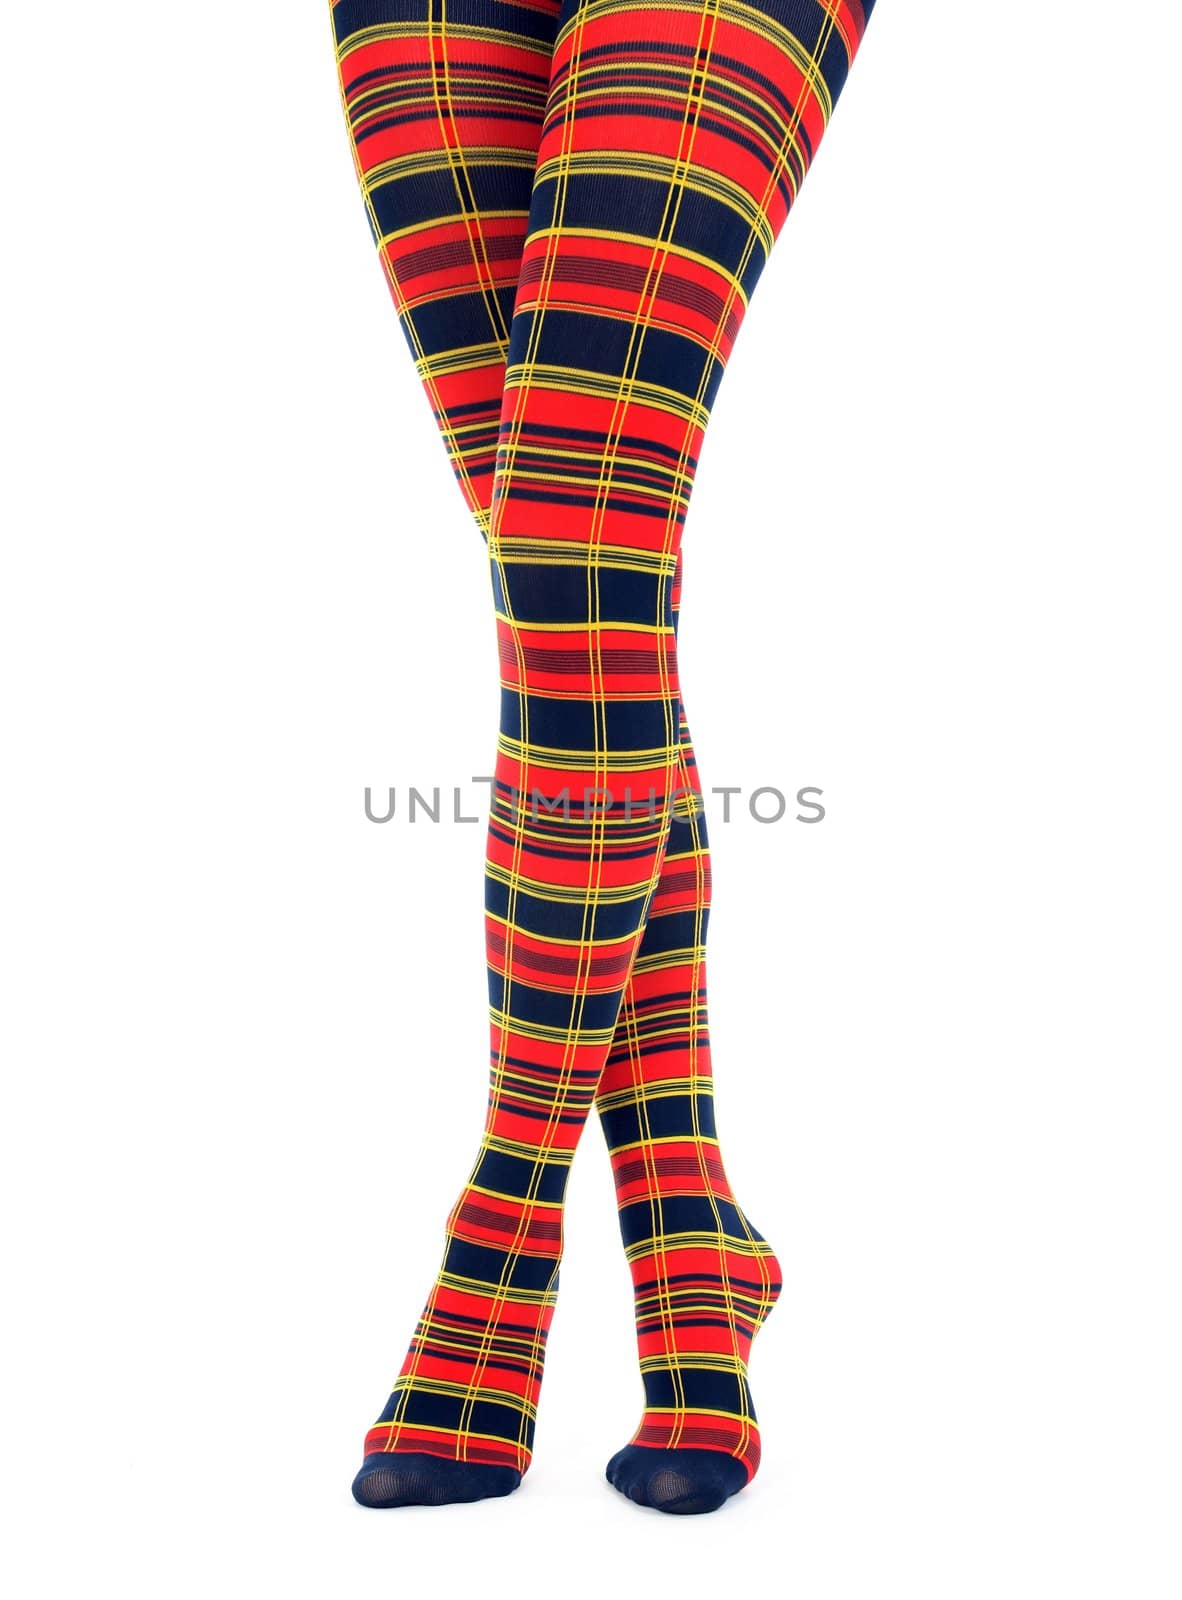 Legs in multicolored fancy tights on white background.